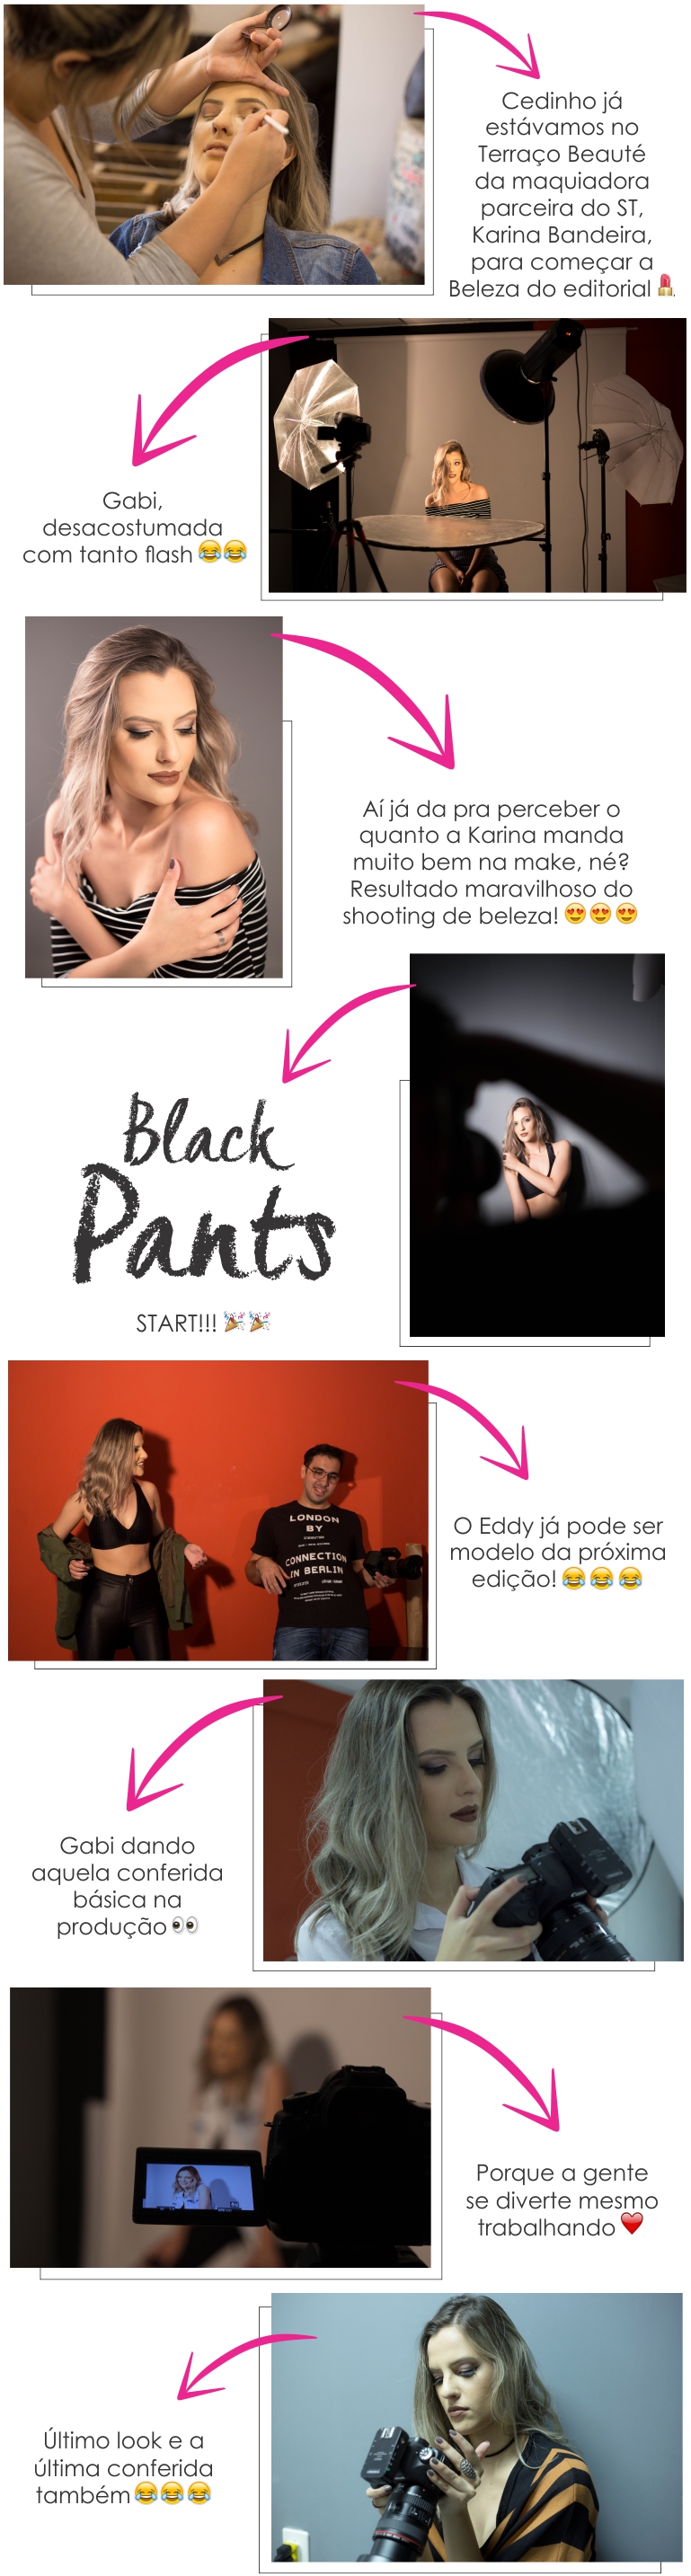 Making of do editorial Black Pants